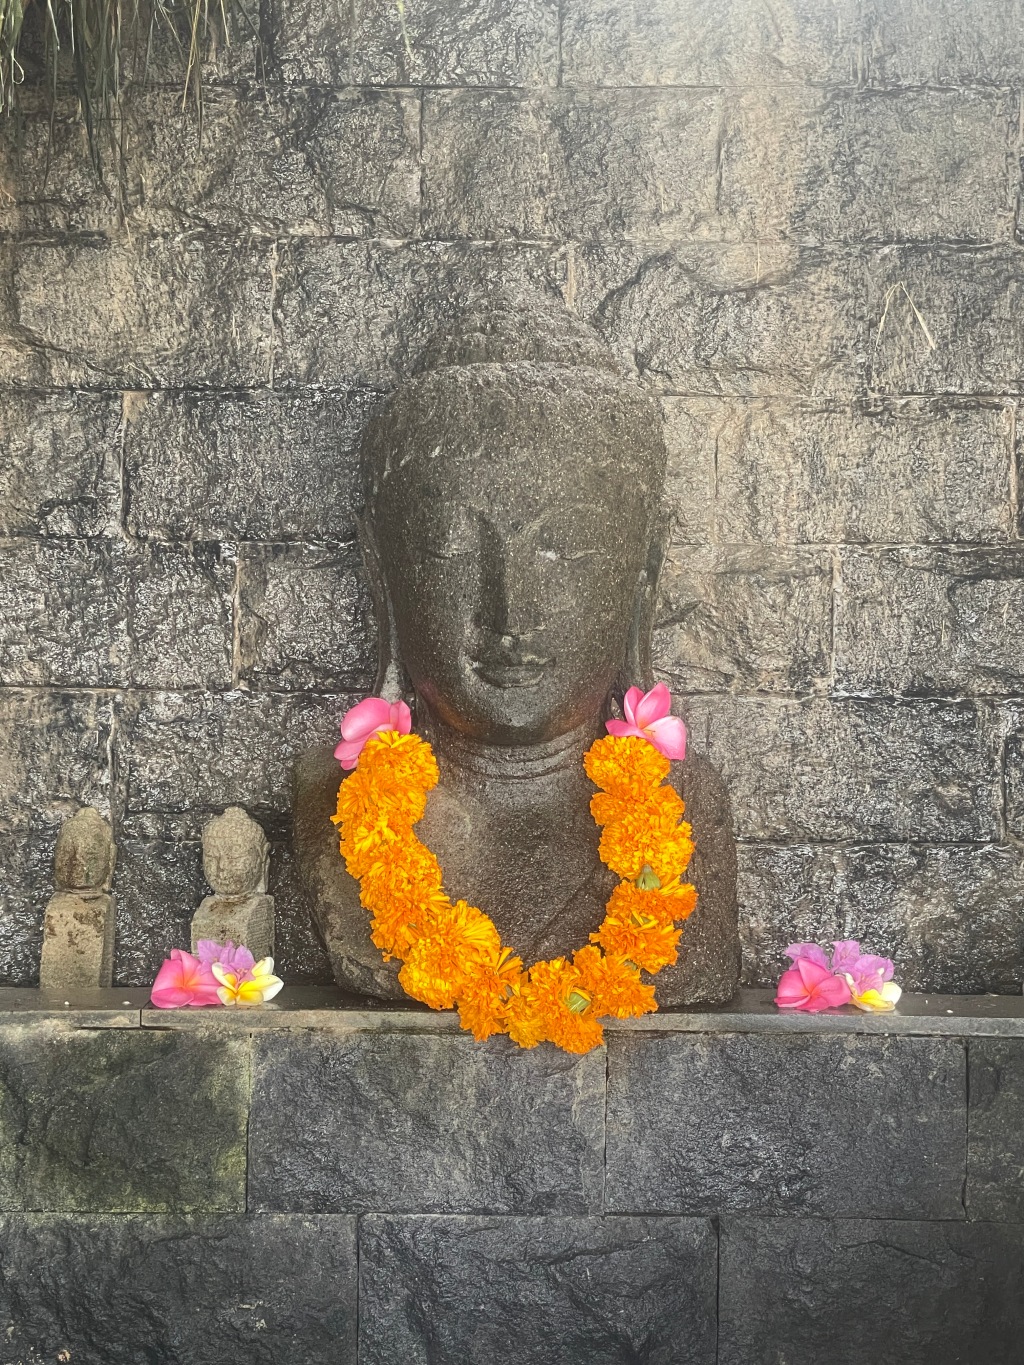 Rituals, blessings and lessons in happiness from Bali